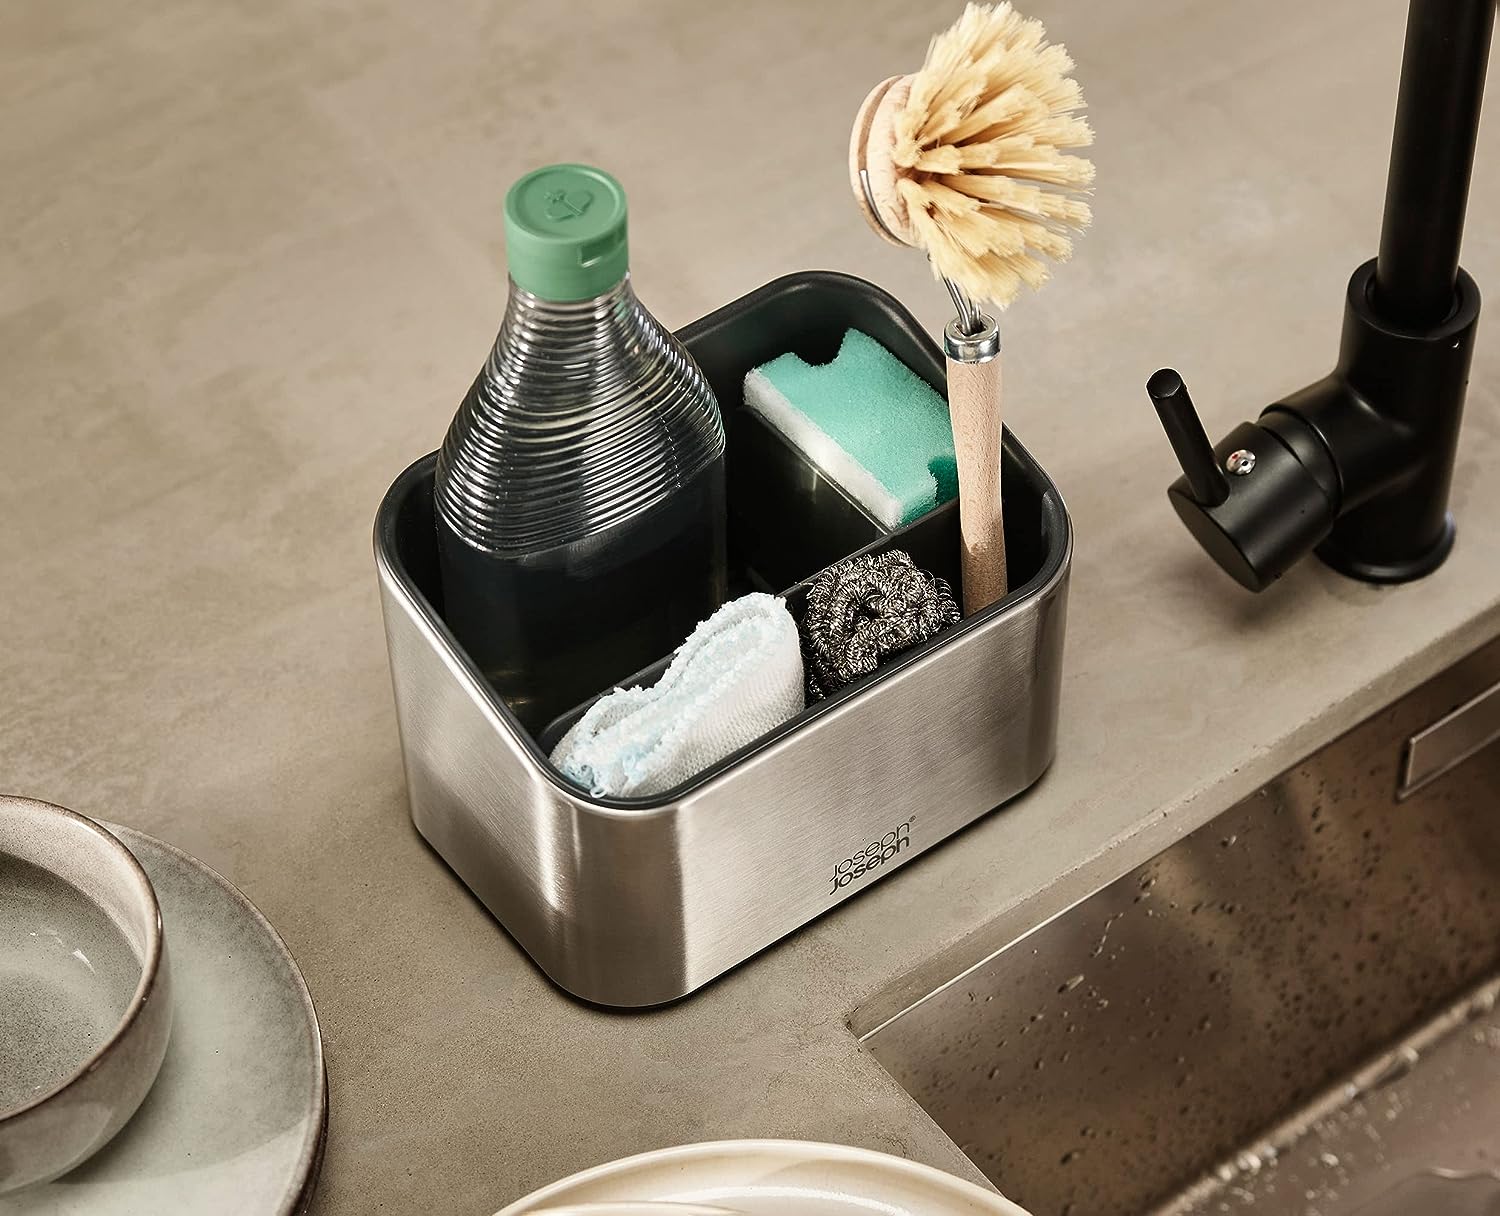 The Only simplehuman Slim Sink Caddy Review You Need to Read